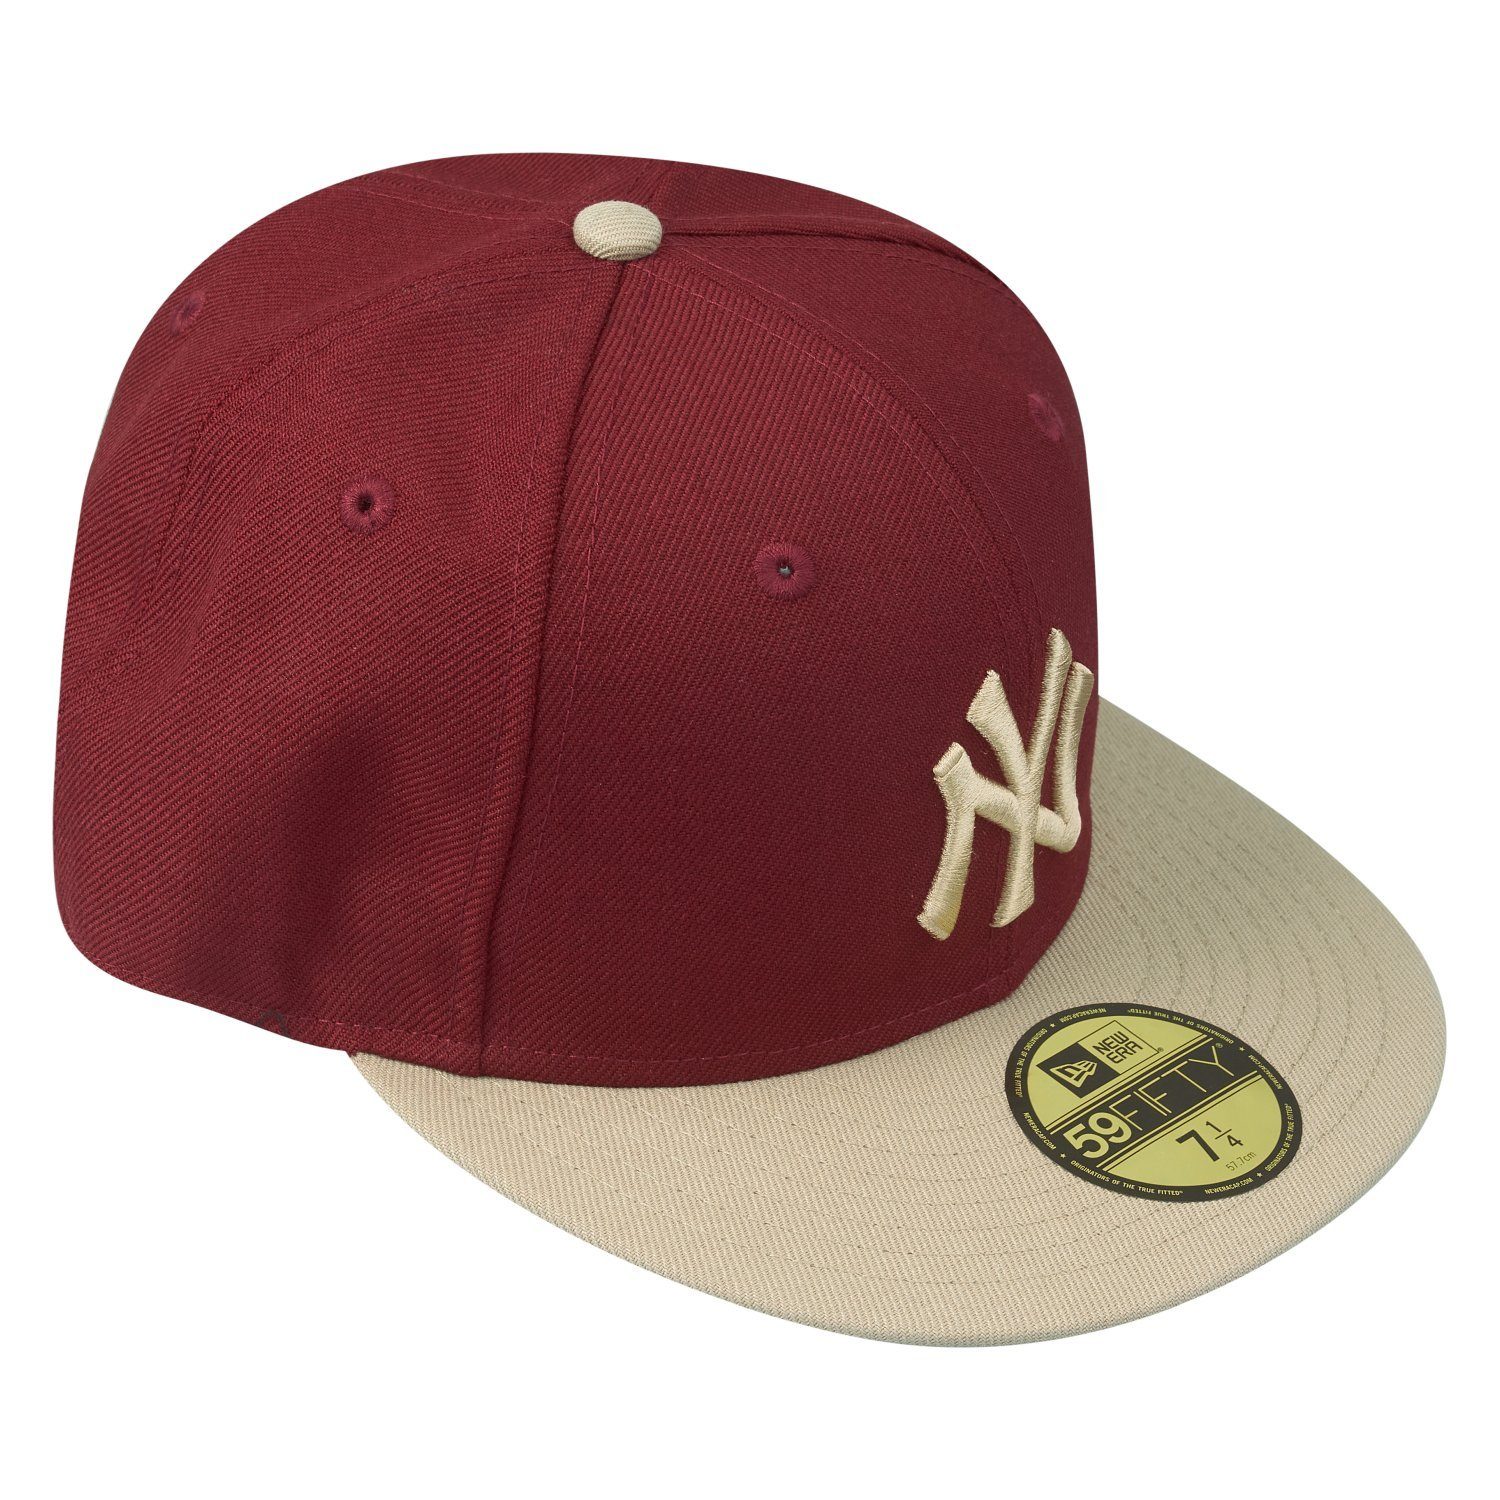 New Cap 59Fifty Fitted Era Yankees York cardinal New